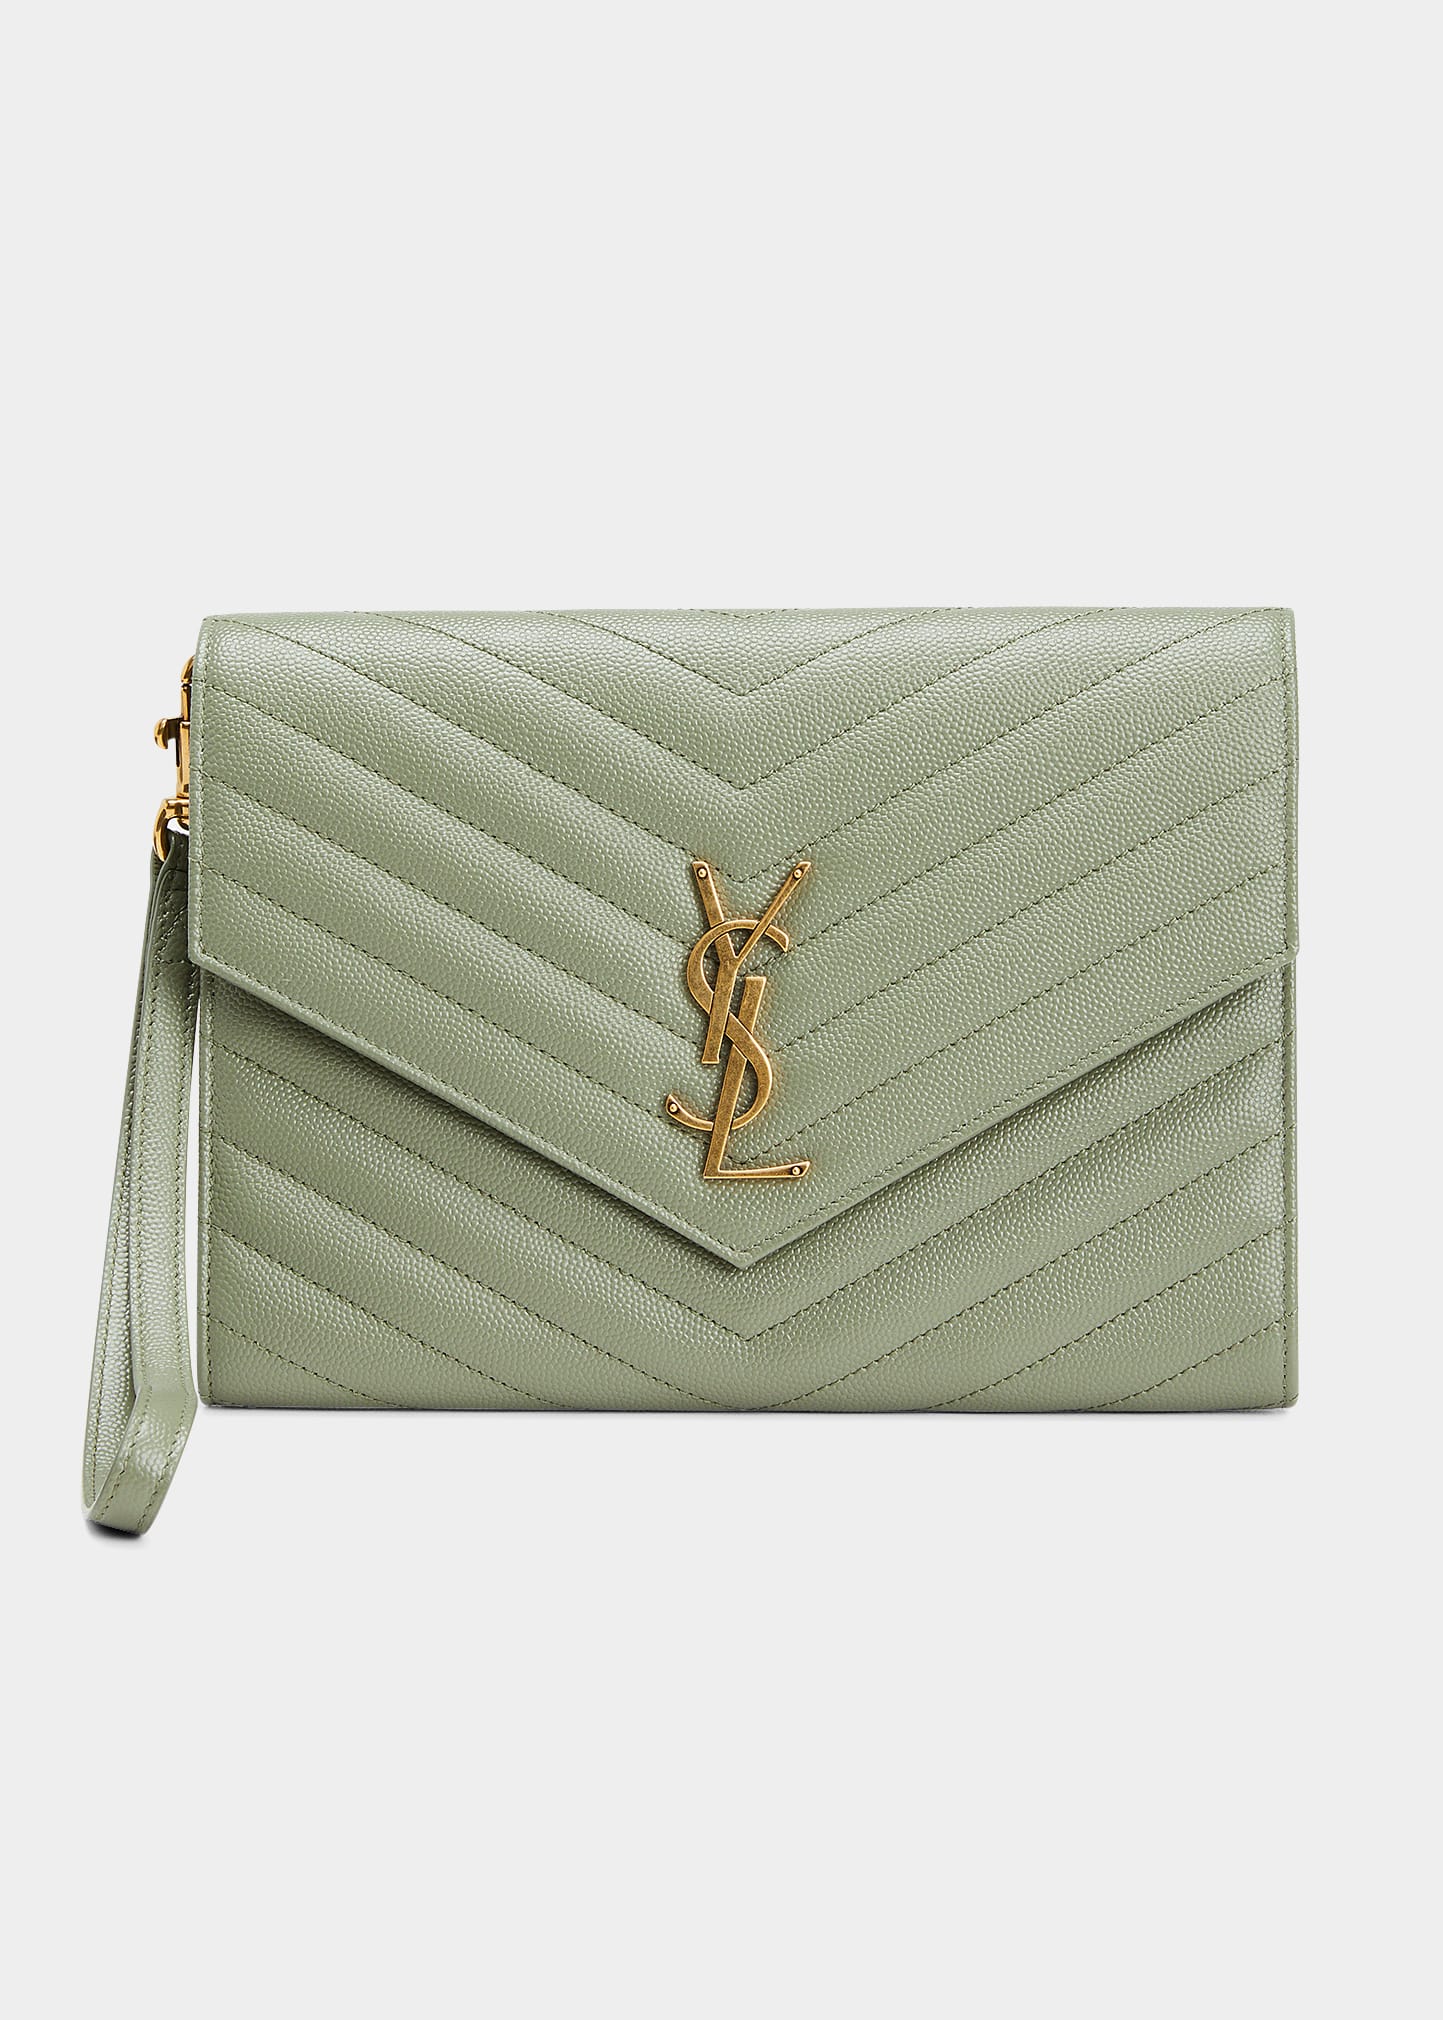 Ysl Quilted Leather Clutch Bag W/ Wristlet In 3317light Sage